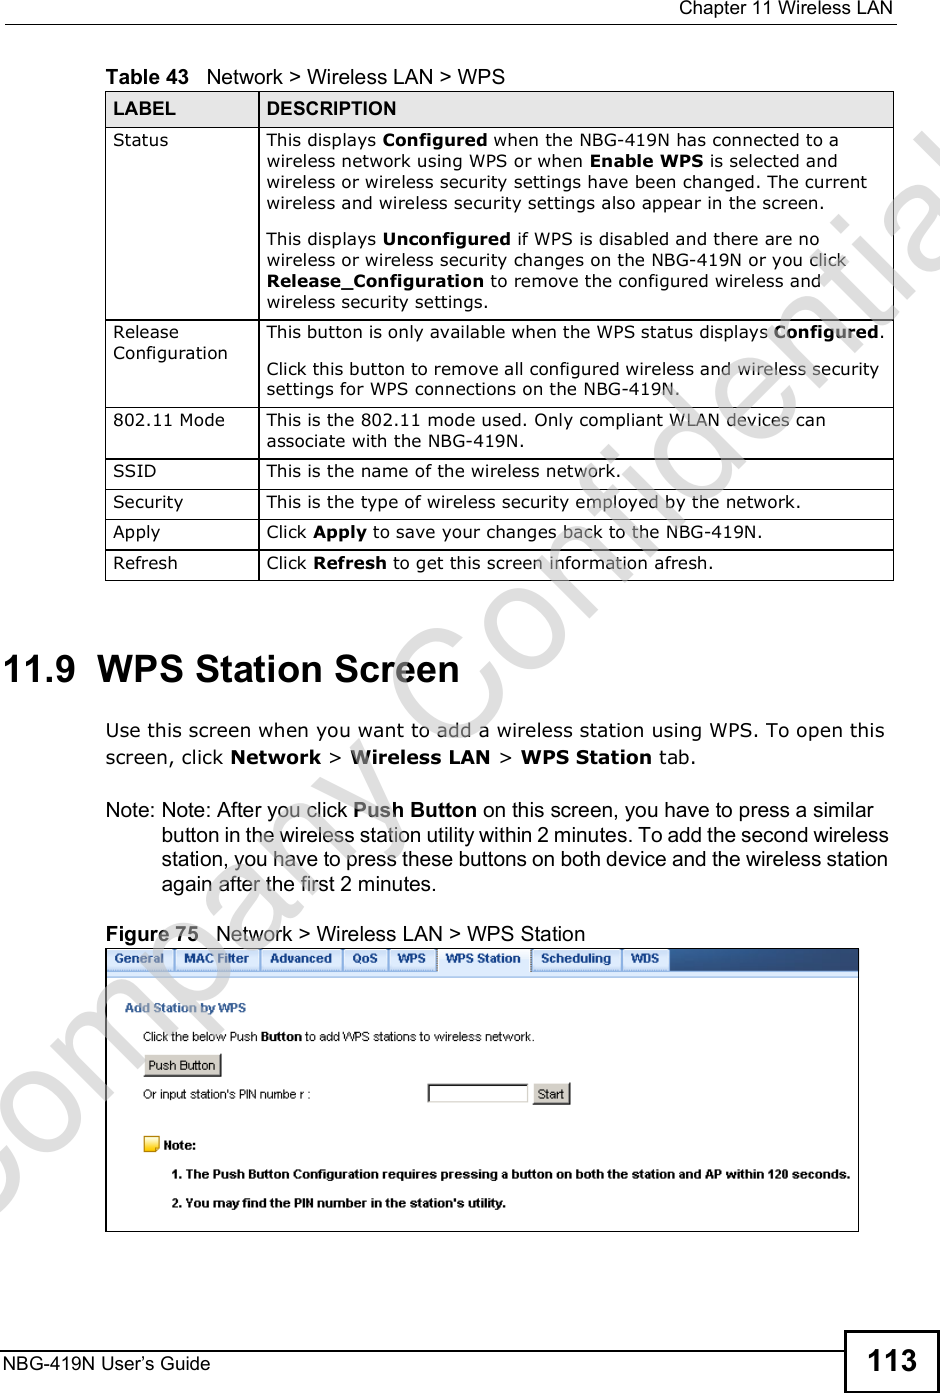  Chapter 11Wireless LANNBG-419N User s Guide 11311.9  WPS Station ScreenUse this screen when you want to add a wireless station using WPS. To open this screen, click Network &gt; Wireless LAN &gt; WPS Station tab.Note: Note: After you click Push Button on this screen, you have to press a similar button in the wireless station utility within 2 minutes. To add the second wireless station, you have to press these buttons on both device and the wireless station again after the first 2 minutes.Figure 75   Network &gt; Wireless LAN &gt; WPS StationStatus This displays Configured when the NBG-419N has connected to a wireless network using WPS or when Enable WPS is selected and wireless or wireless security settings have been changed. The current wireless and wireless security settings also appear in the screen.This displays Unconfigured if WPS is disabled and there are no wireless or wireless security changes on the NBG-419N or you click Release_Configuration to remove the configured wireless and wireless security settings.Release ConfigurationThis button is only available when the WPS status displays Configured.Click this button to remove all configured wireless and wireless security settings for WPS connections on the NBG-419N.802.11 Mode This is the 802.11 mode used. Only compliant WLAN devices can associate with the NBG-419N.SSID This is the name of the wireless network.Security This is the type of wireless security employed by the network.Apply Click Apply to save your changes back to the NBG-419N.Refresh Click Refresh to get this screen information afresh.Table 43   Network &gt; Wireless LAN &gt; WPSLABEL DESCRIPTIONCompany Confidential